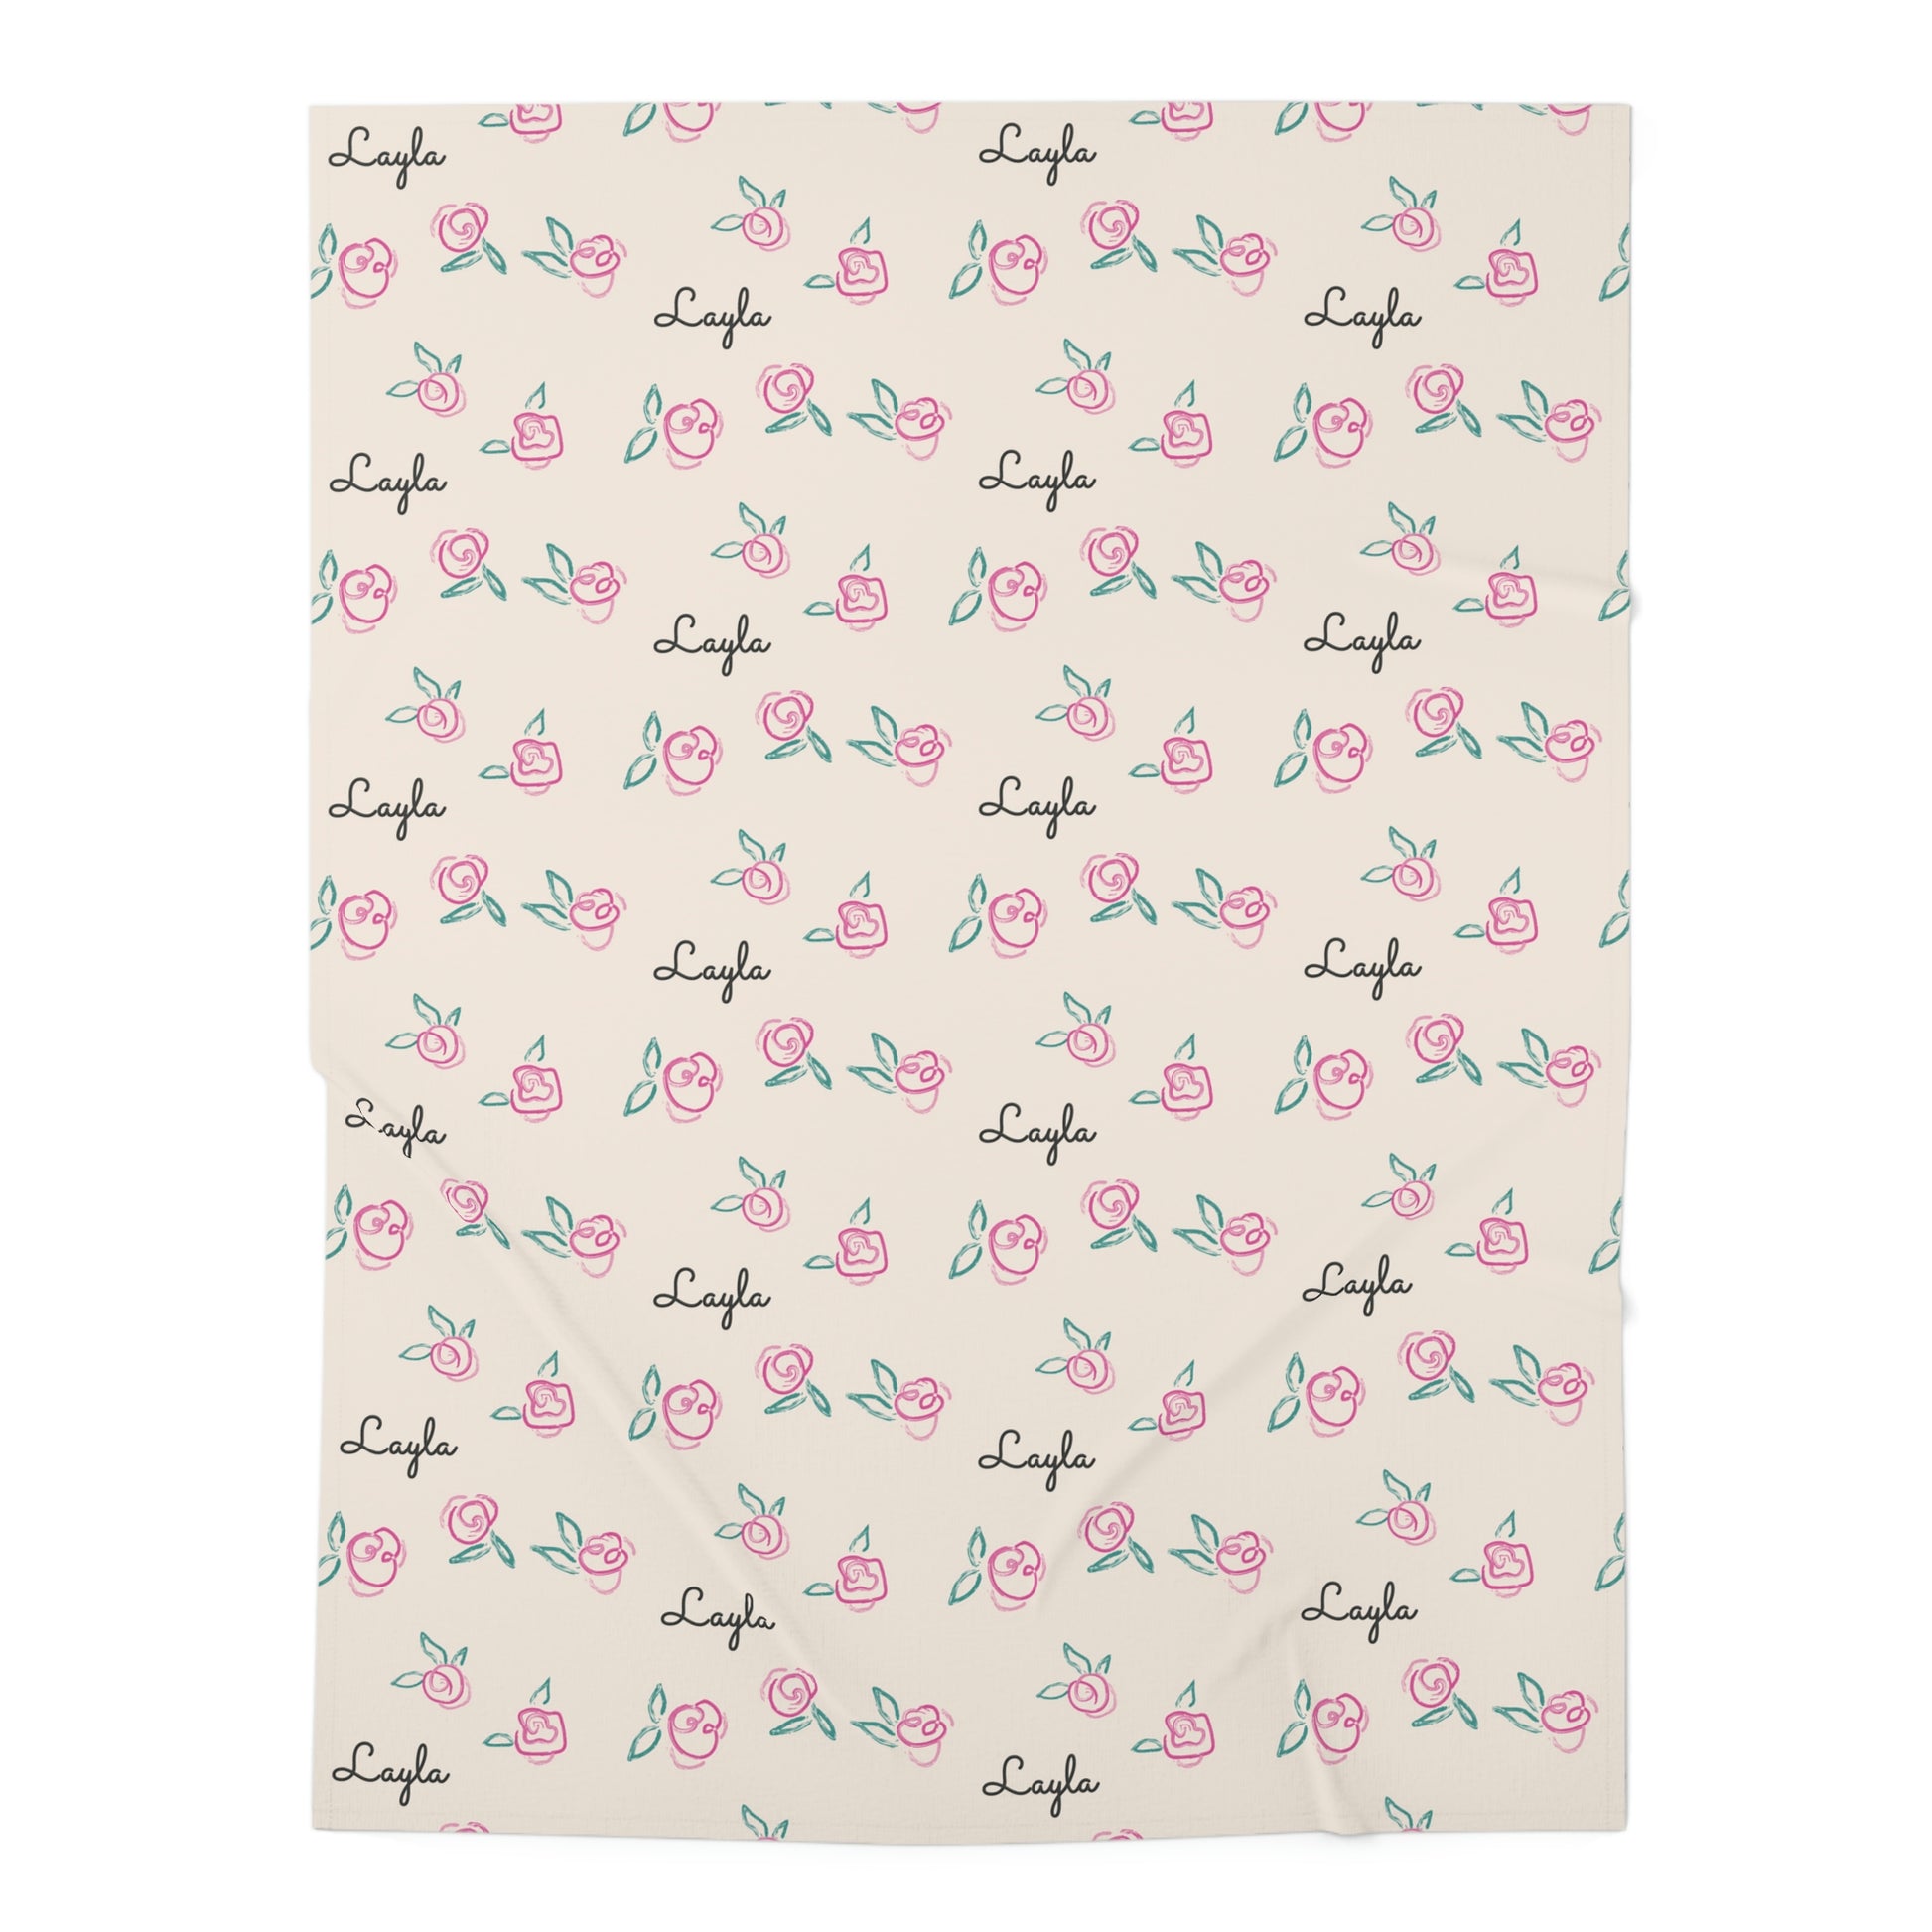 Jersey personalized baby blanket in pink rose with green leaves pattern laid flat